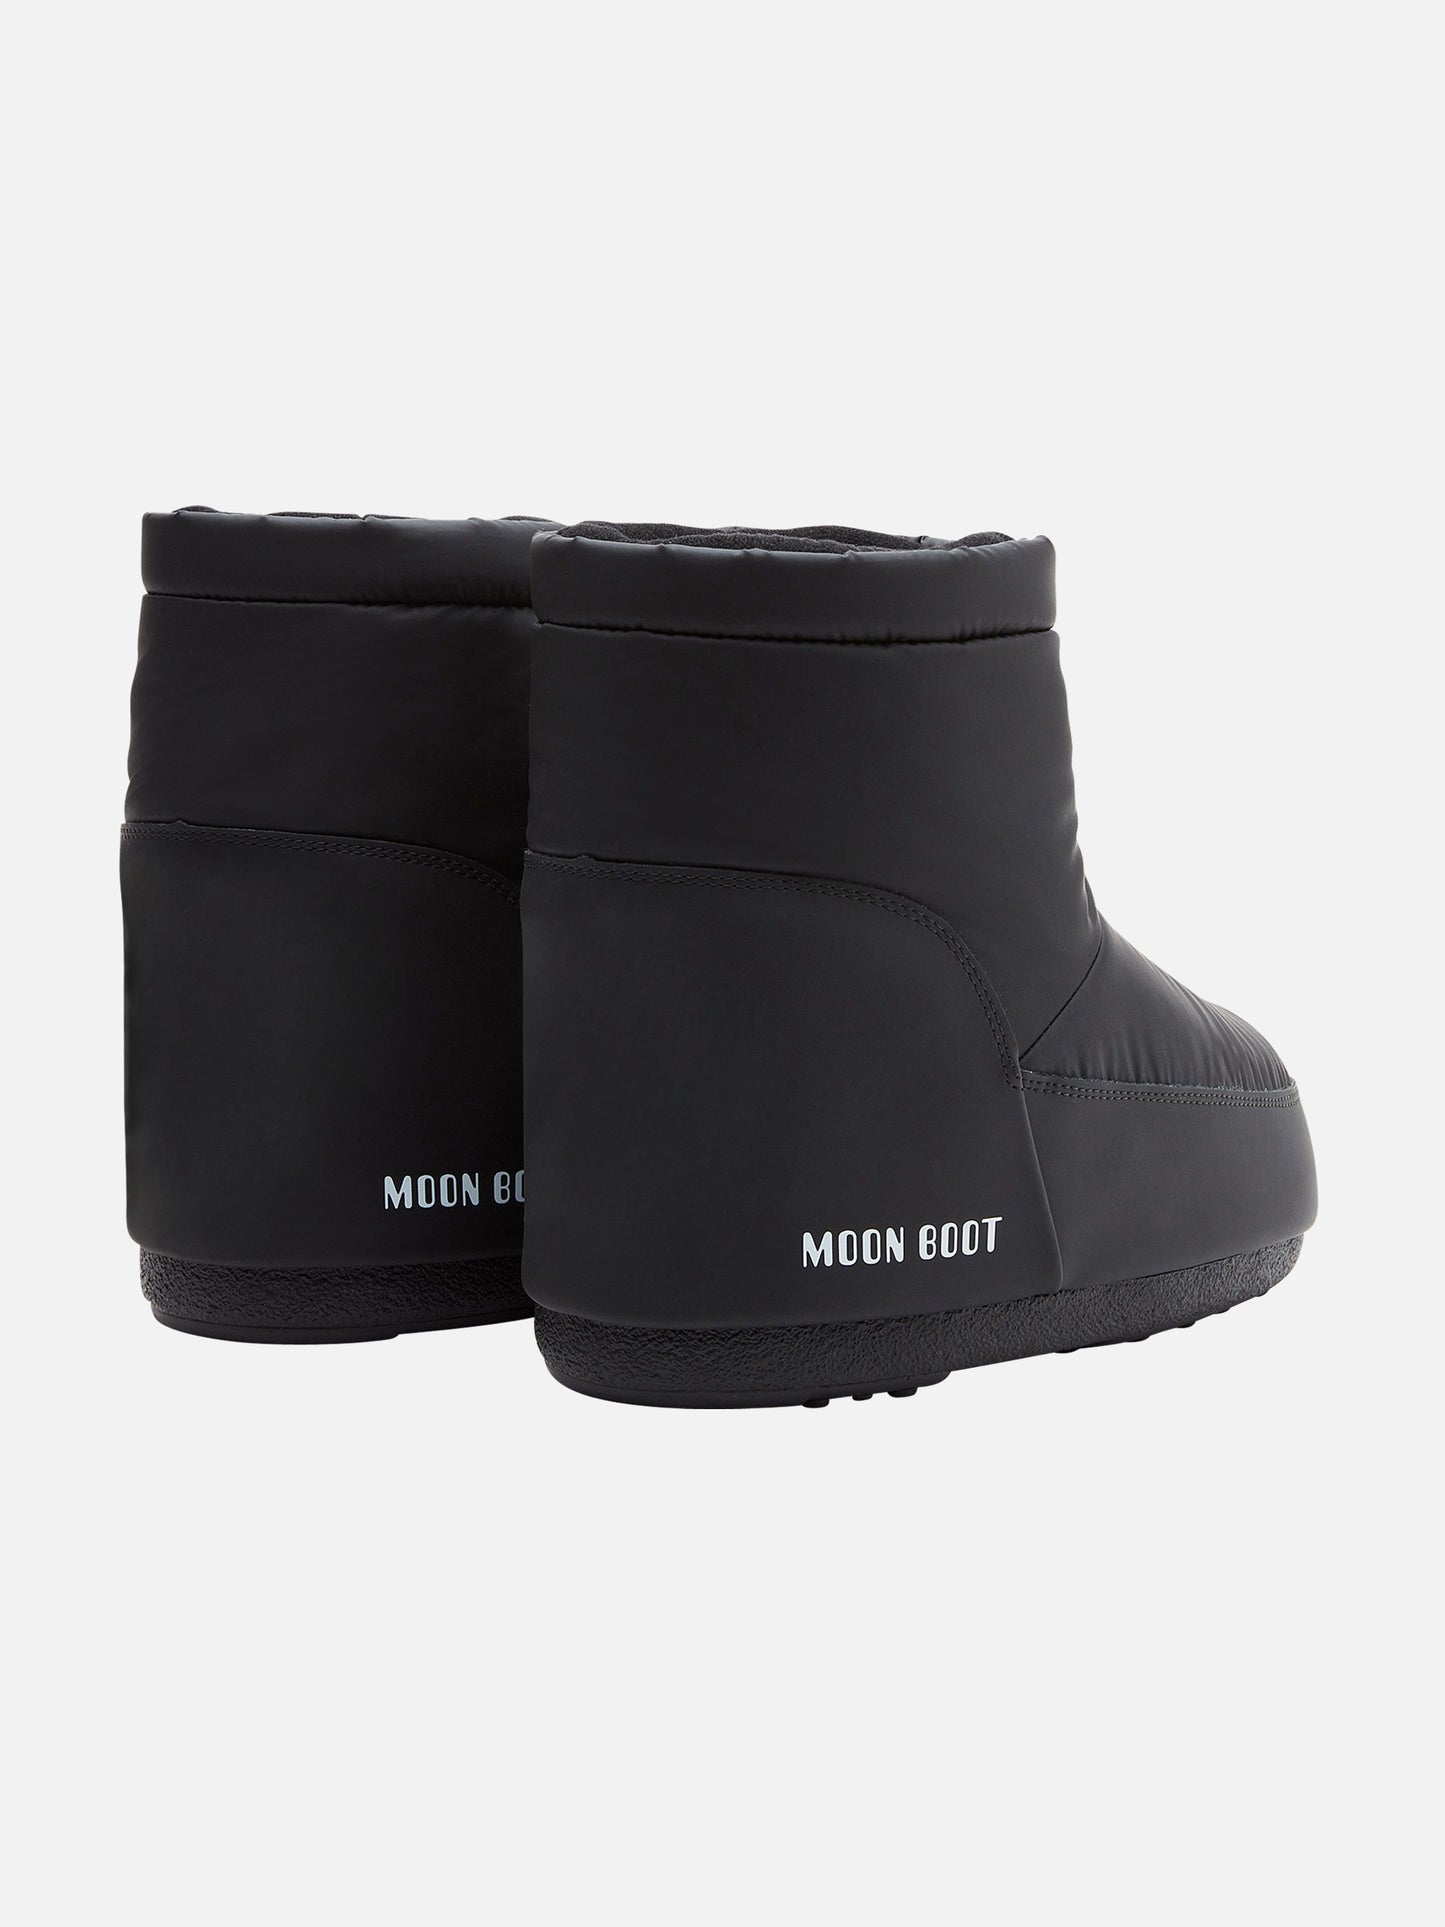 MOON BOOT - Icon Low No Lace Rubber